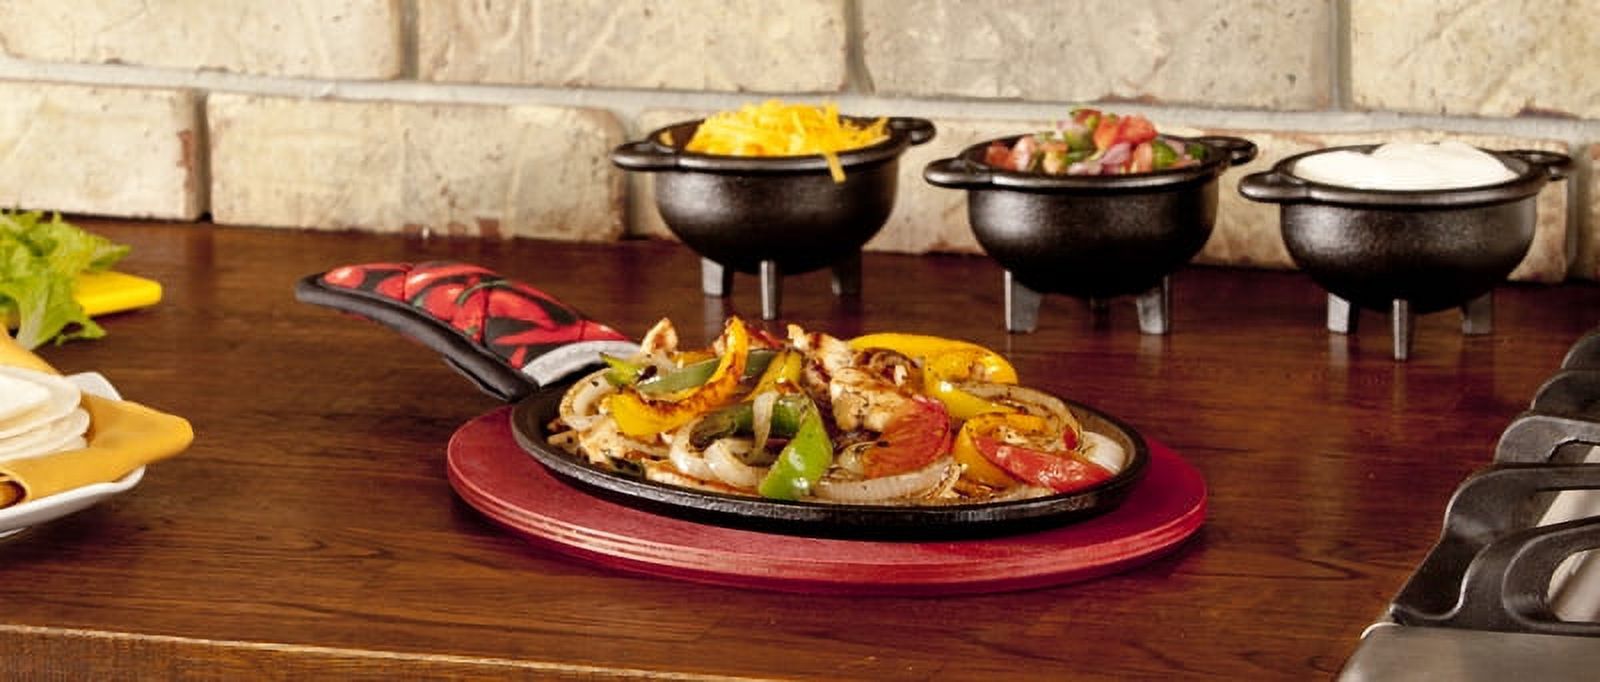 Lodge Cast Iron Fajita Set with Red Stained Wooden Underliner & Handle Mitt, 3 Piece - image 5 of 7